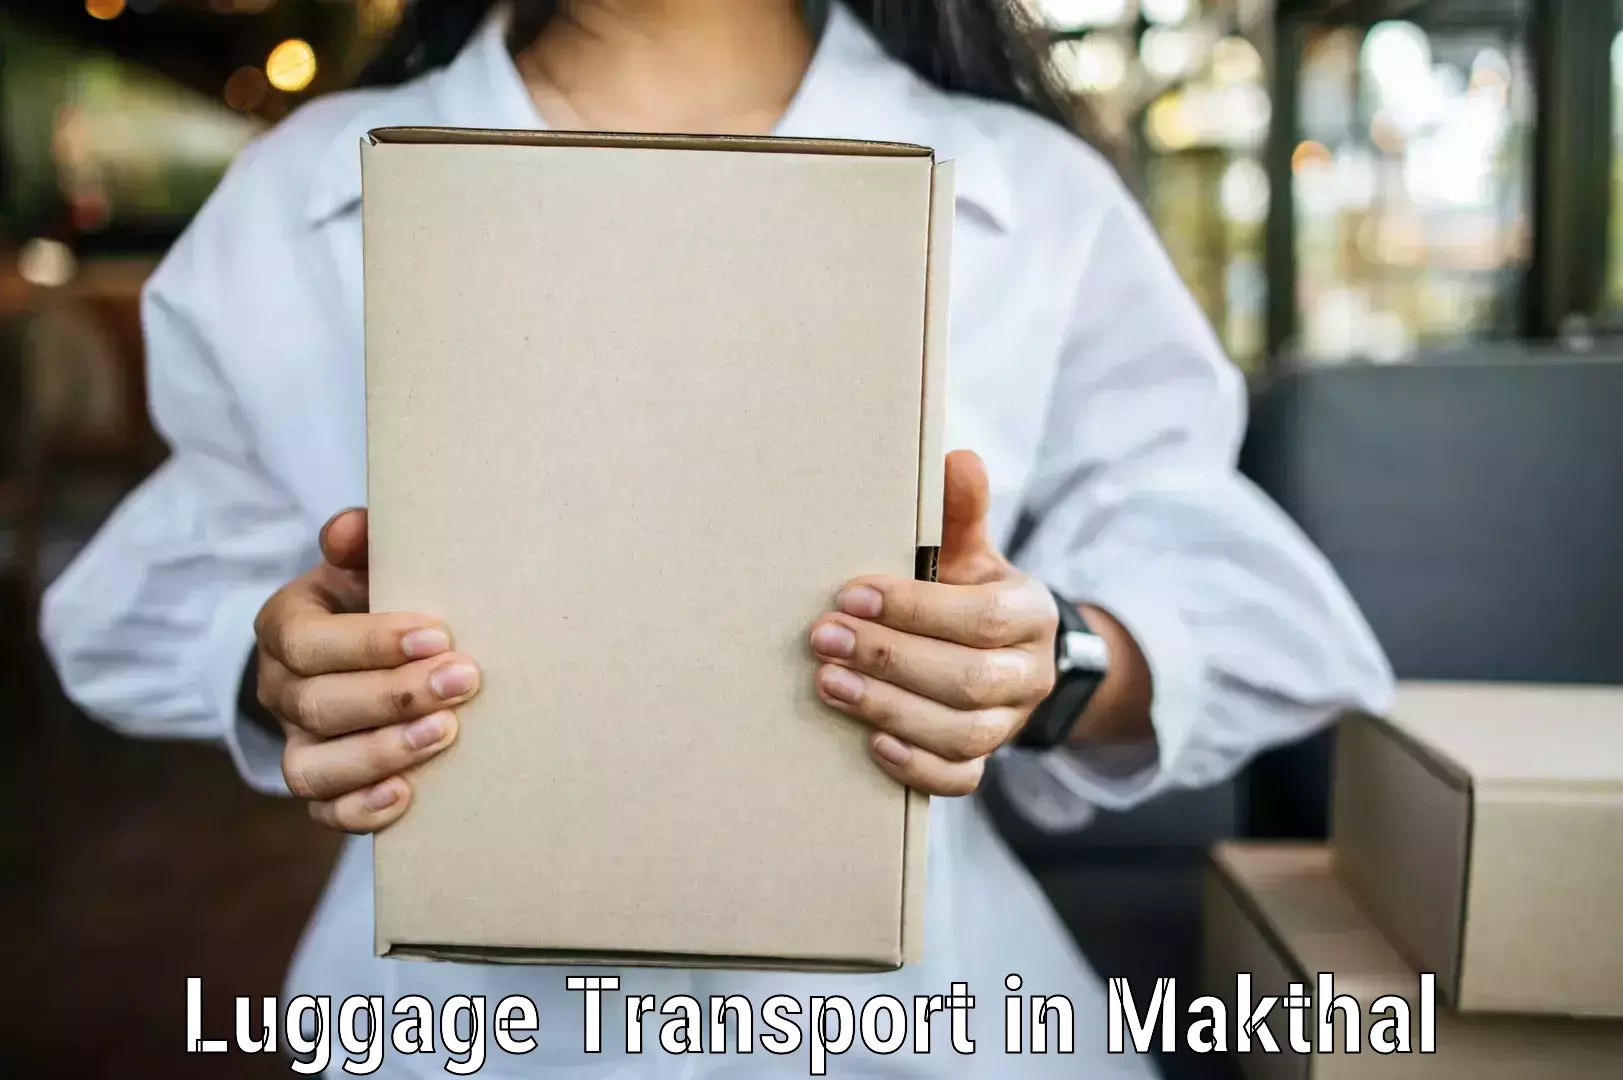 Luggage transport consulting in Makthal